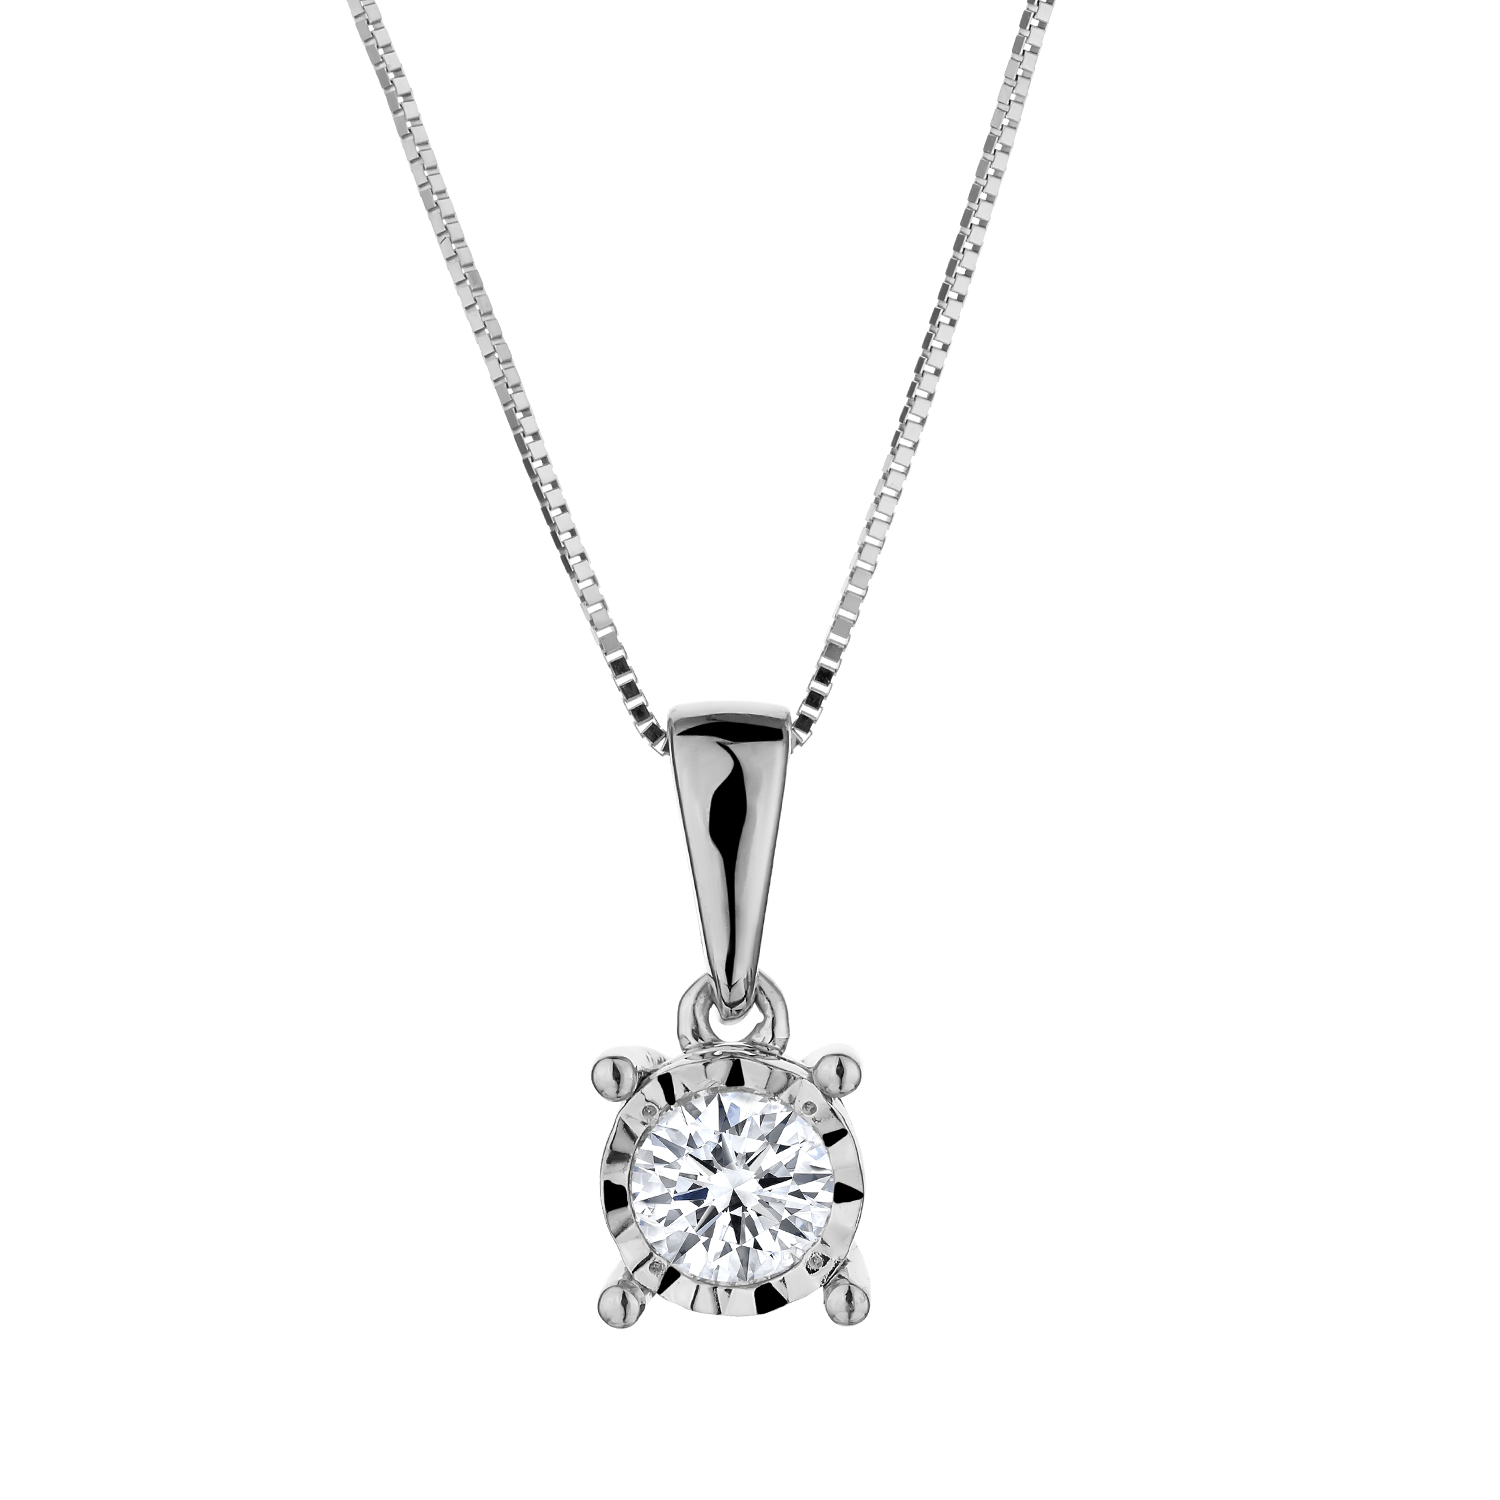 .10 Carat of Diamond "Miracle" Pendant, 14kt White Gold....................NOW